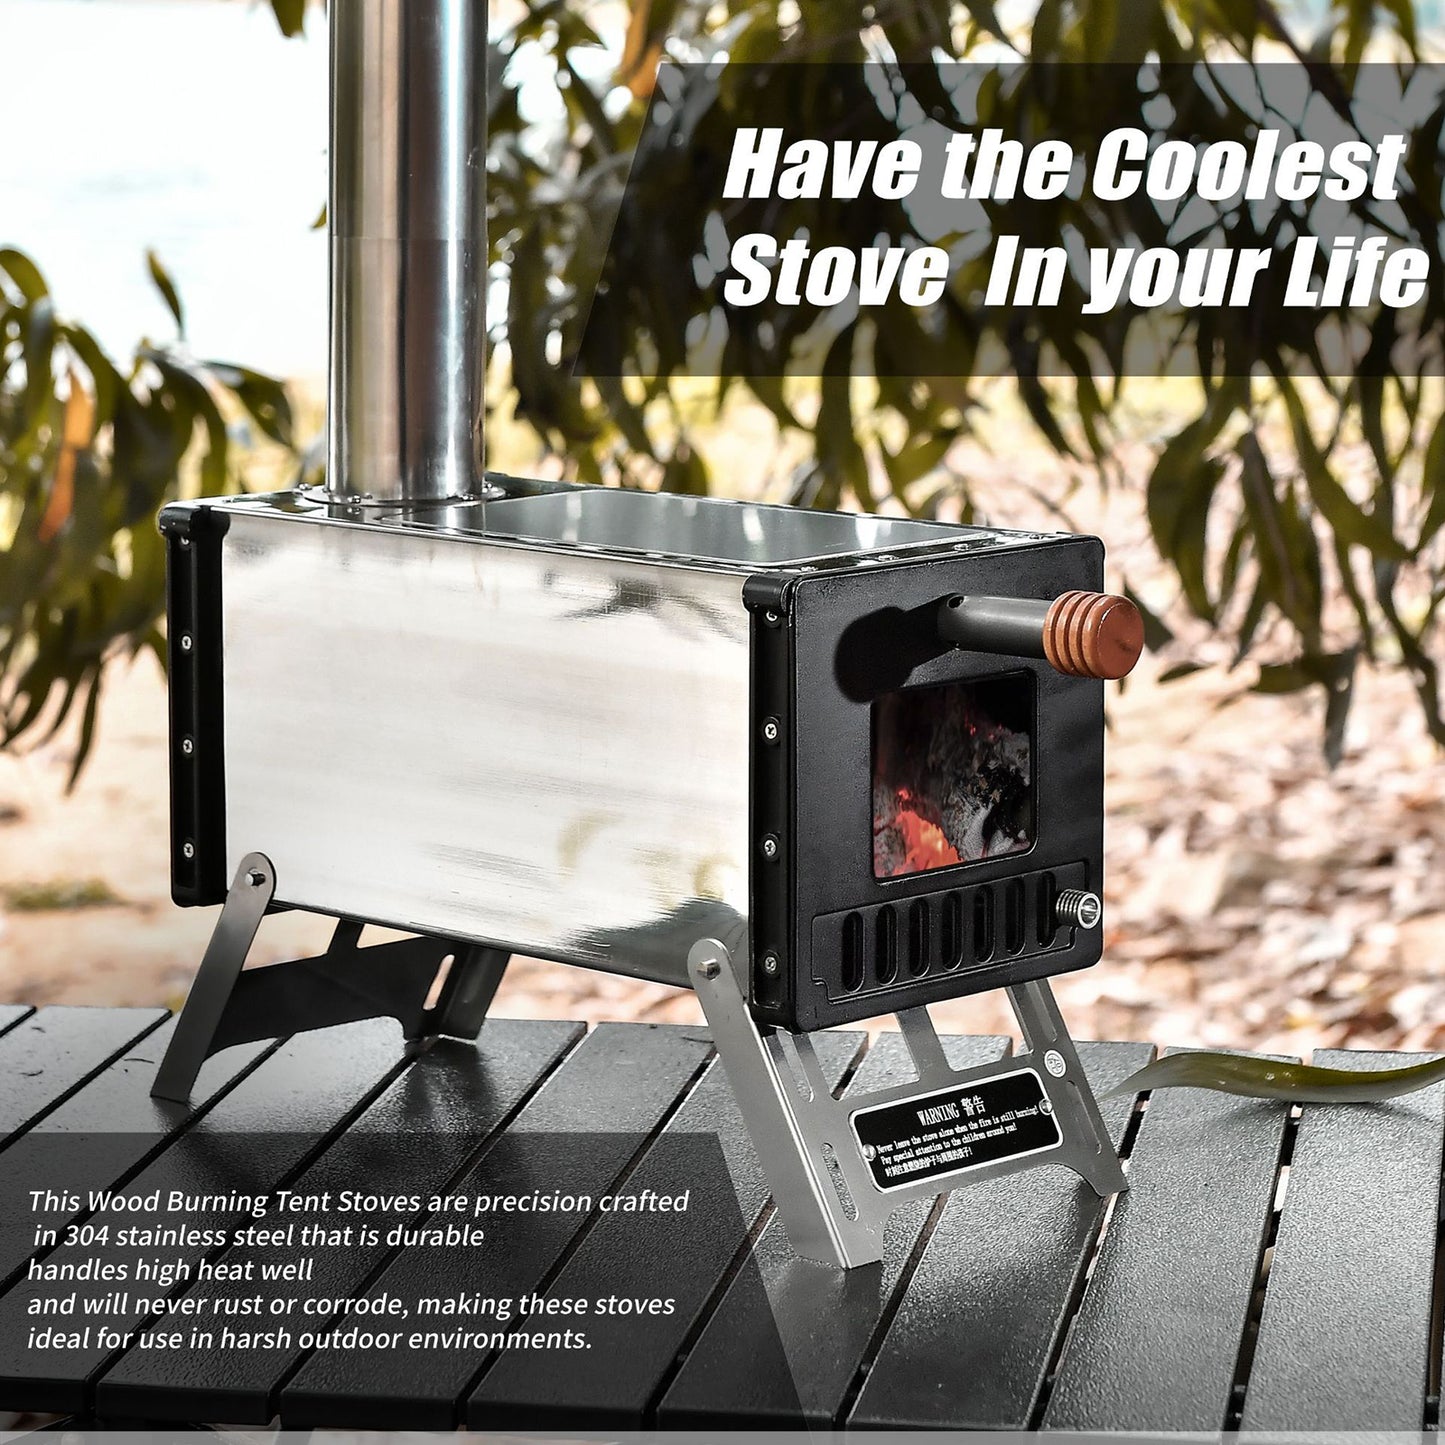 Portable Wood Burning Tent Stove with Pipes for Camping Cooking Heat 2022.